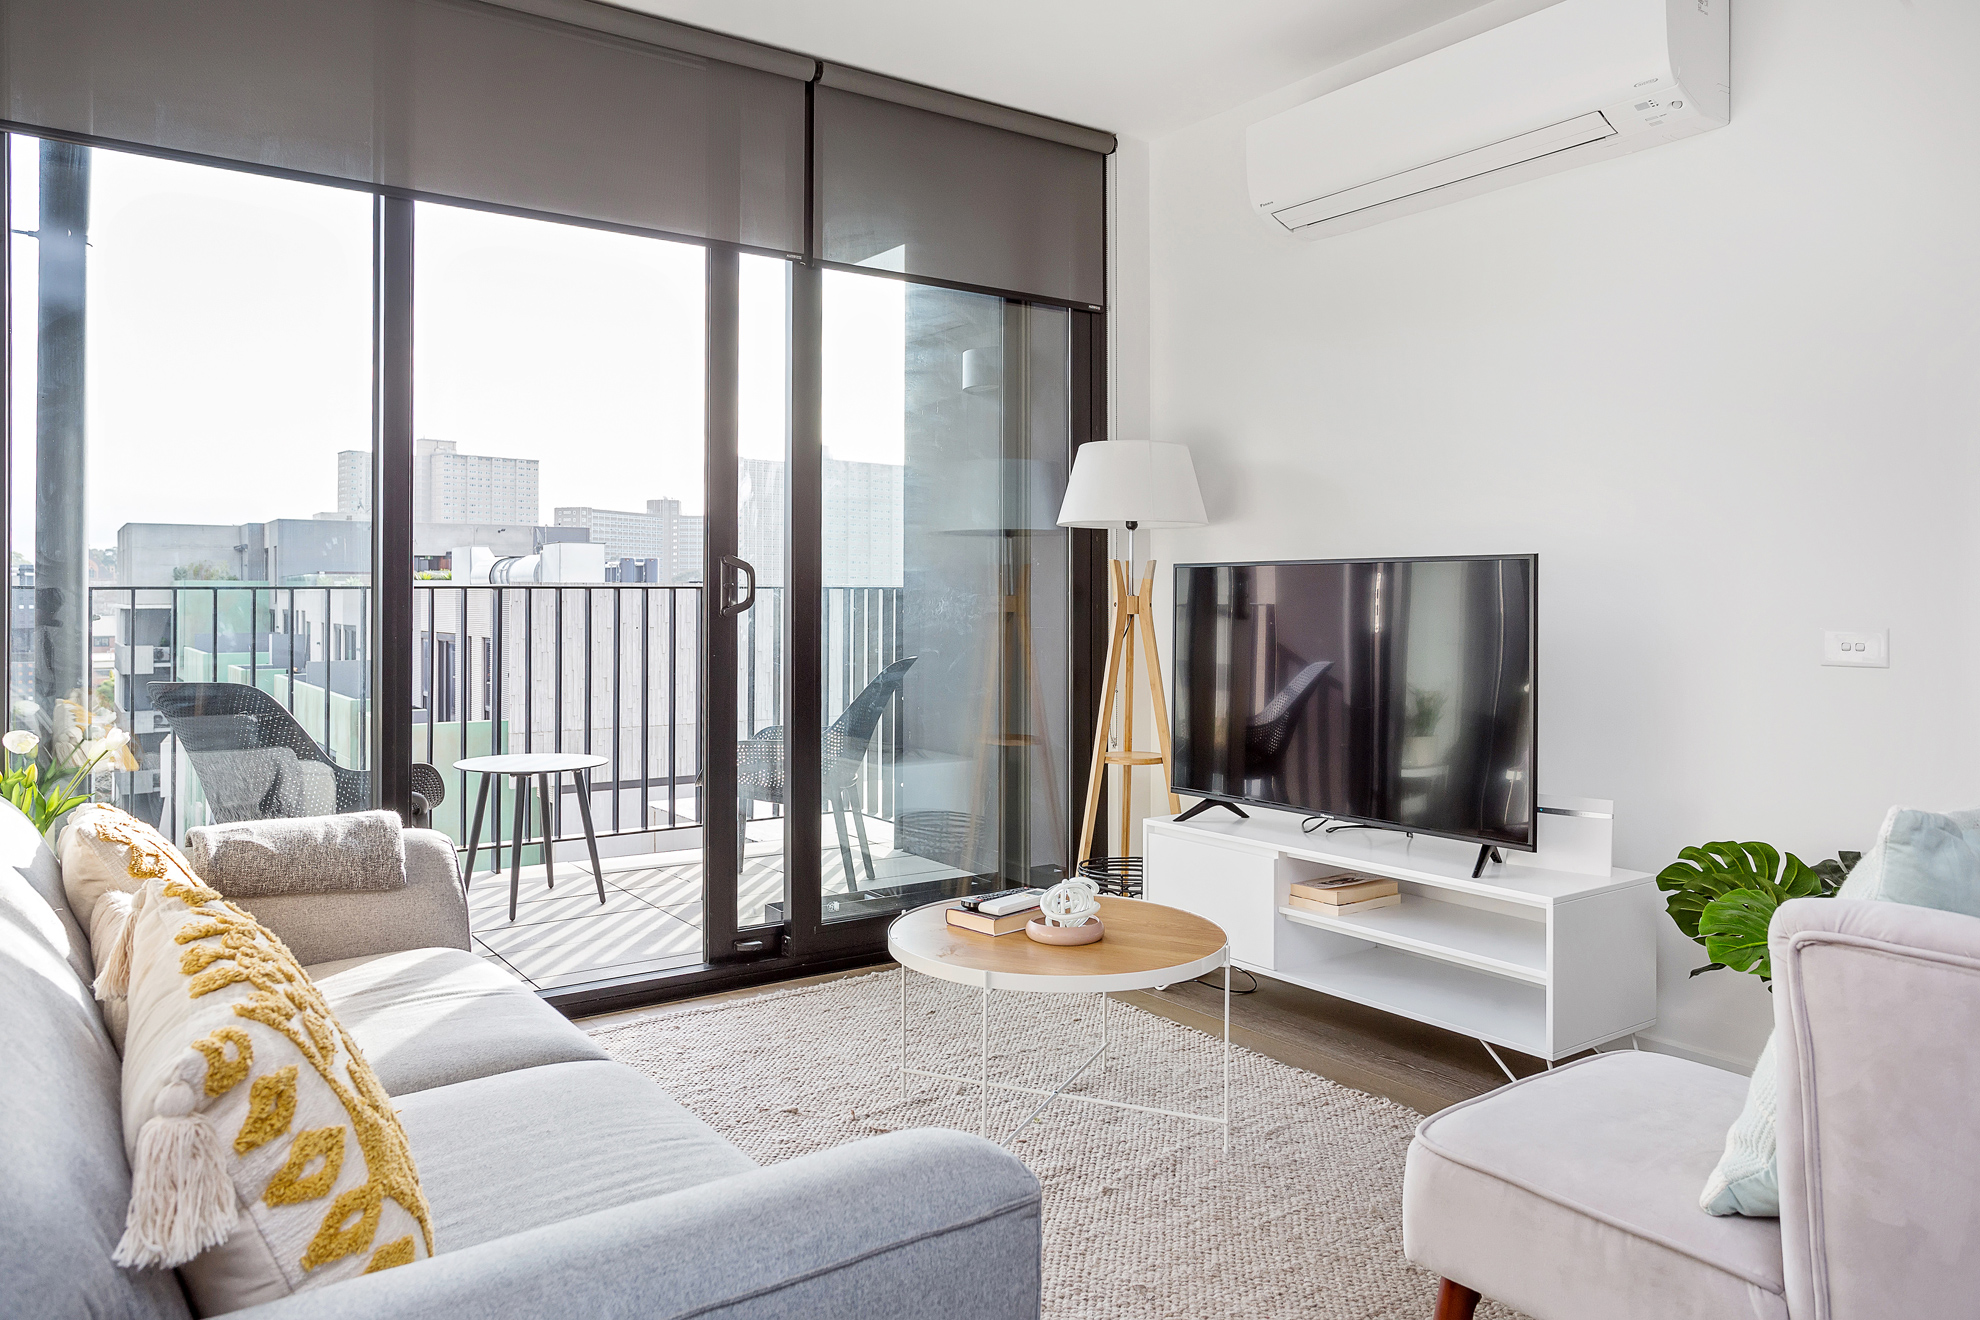 Lounge with a view - Two Bedroom Executive Apartment - Urban Rest- Palmerston Street Apartments Melbourne